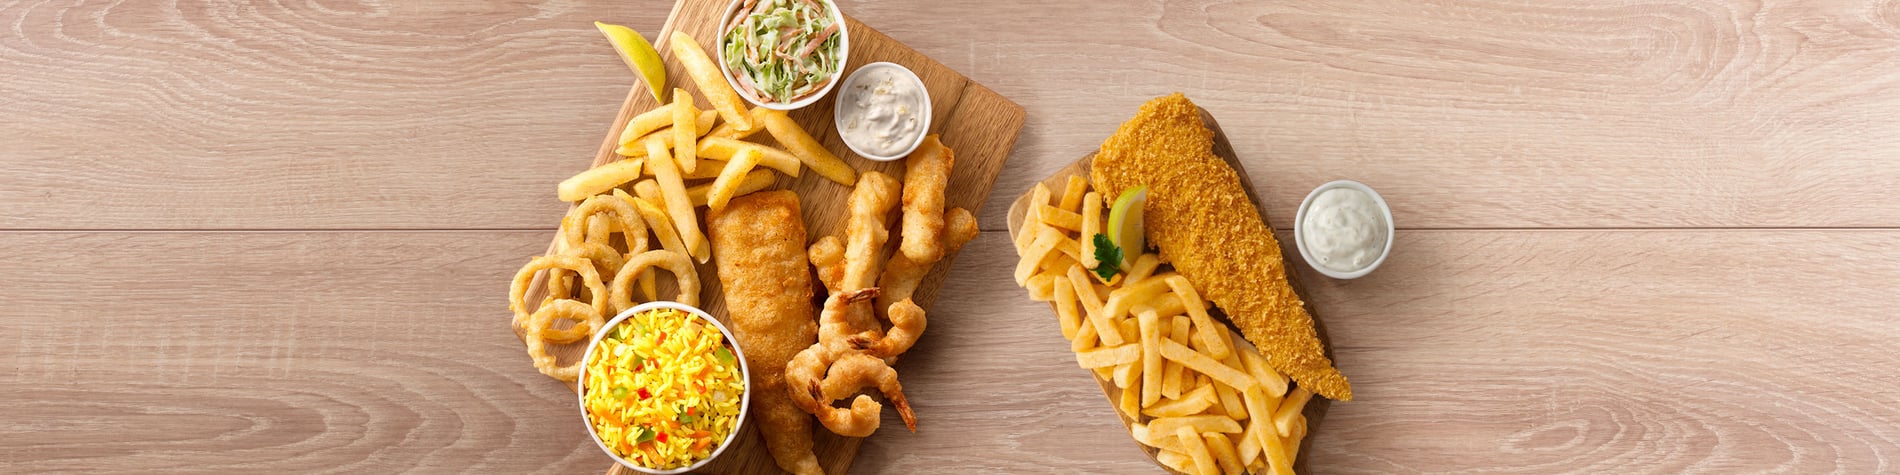 Seafood meals from Fishaways Ballito Junction including a Crunchy Fish and Chips meal and a seafood Platter for One with hake, calamari, prawns, chips, onion rings, and coleslaw.